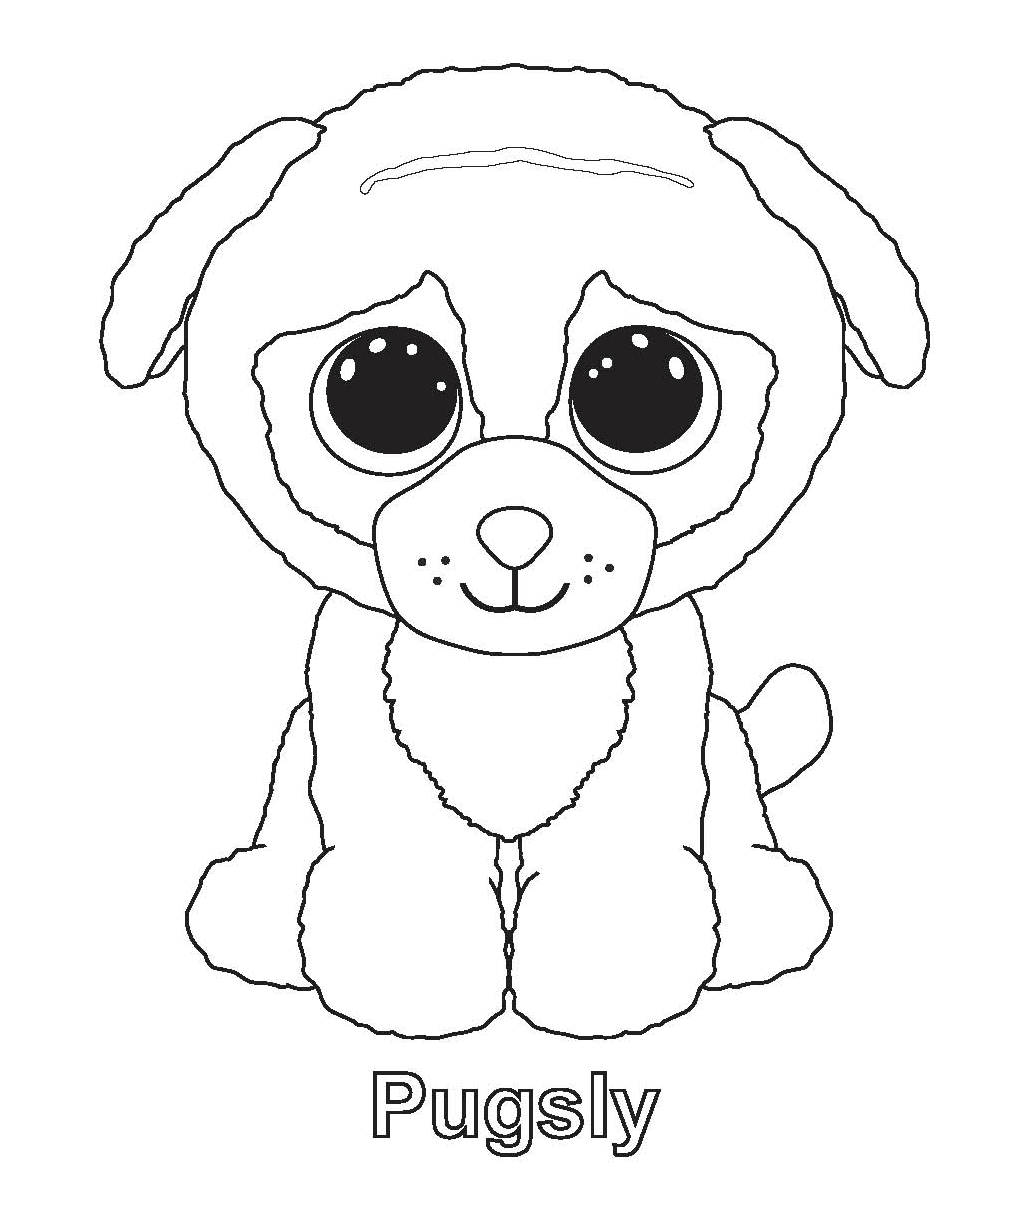 Pugsly Beanie Boos Coloring Page